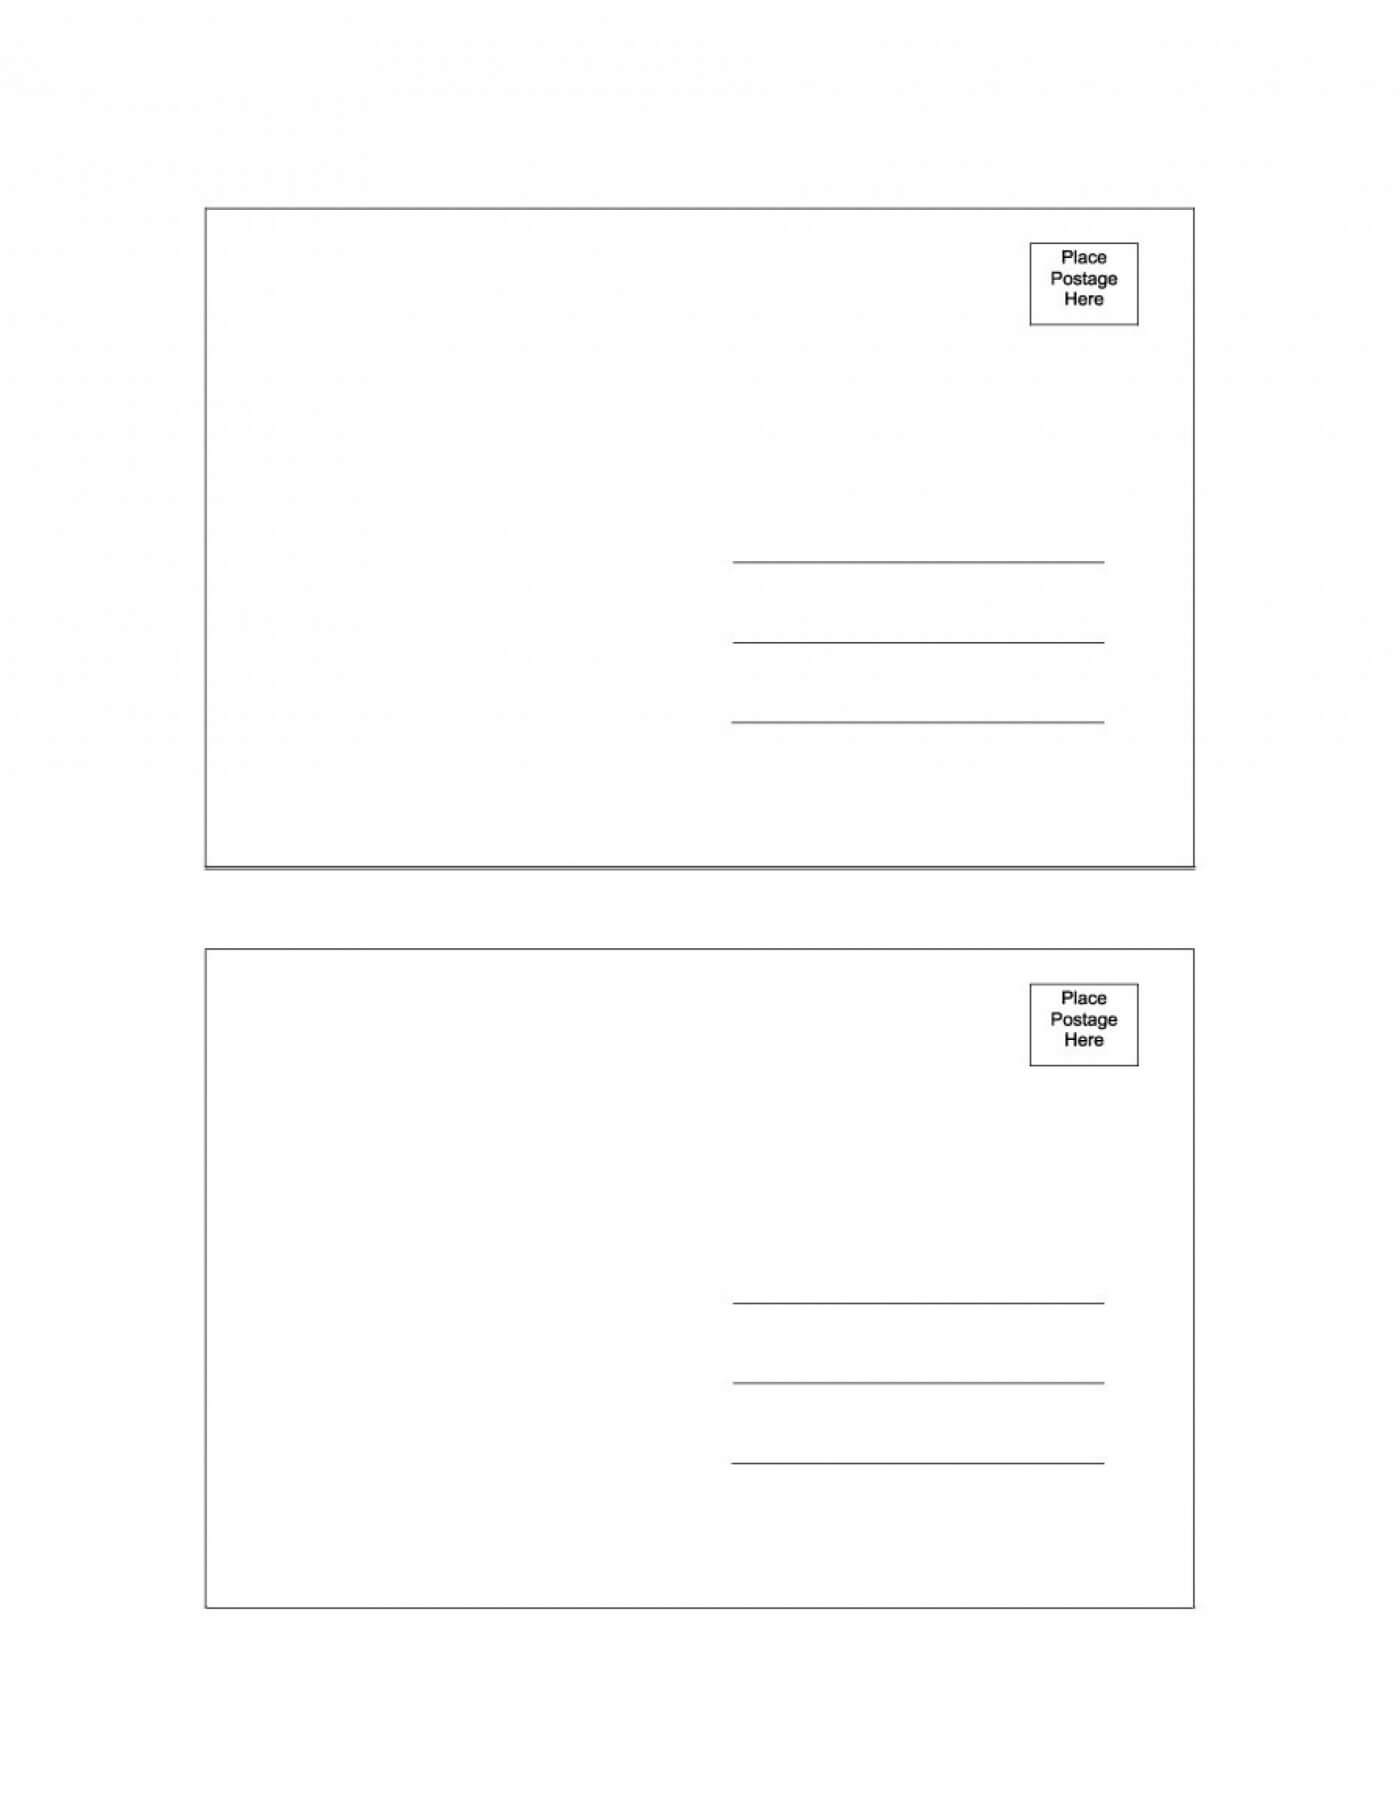 001 5X7 Postcard Template For Word Top Ideas 5 X 7 Microsoft With 5X7 Postcard Template